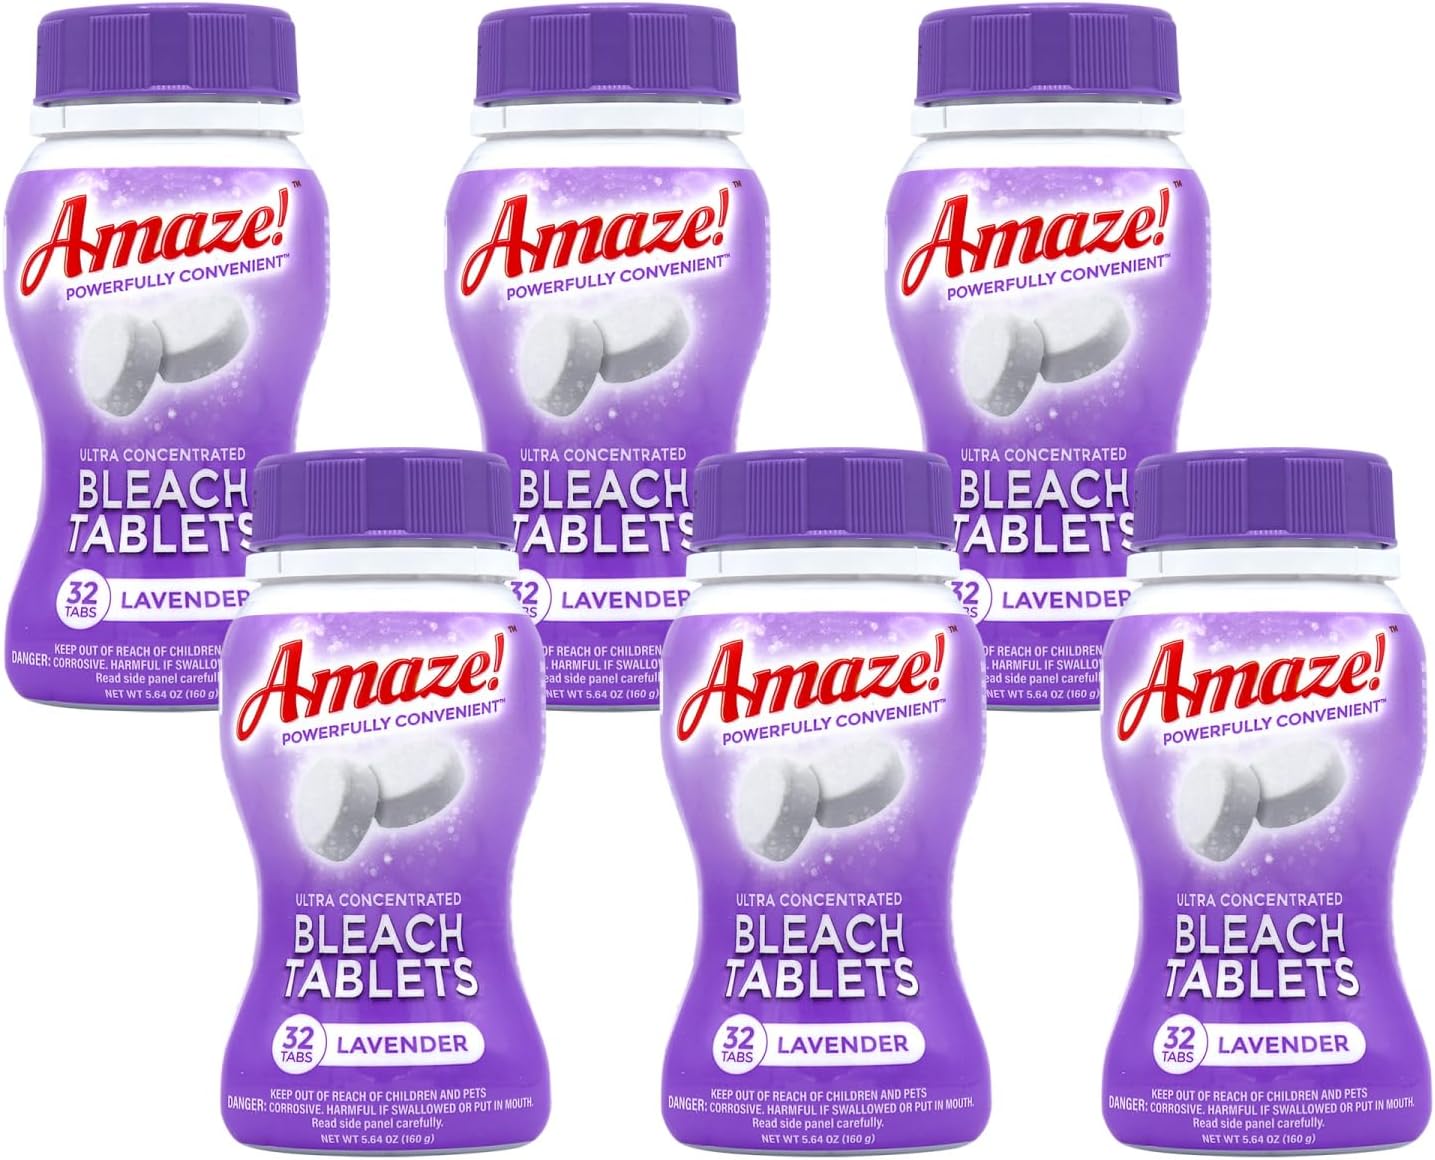 AMAZE Ultra Concentrated Bleach Tablets [6 bottles] - Lavender Scent - for Laundry, Toilet, and Multipurpose Home Cleaning. No Splash Liquid Bleach Alternative